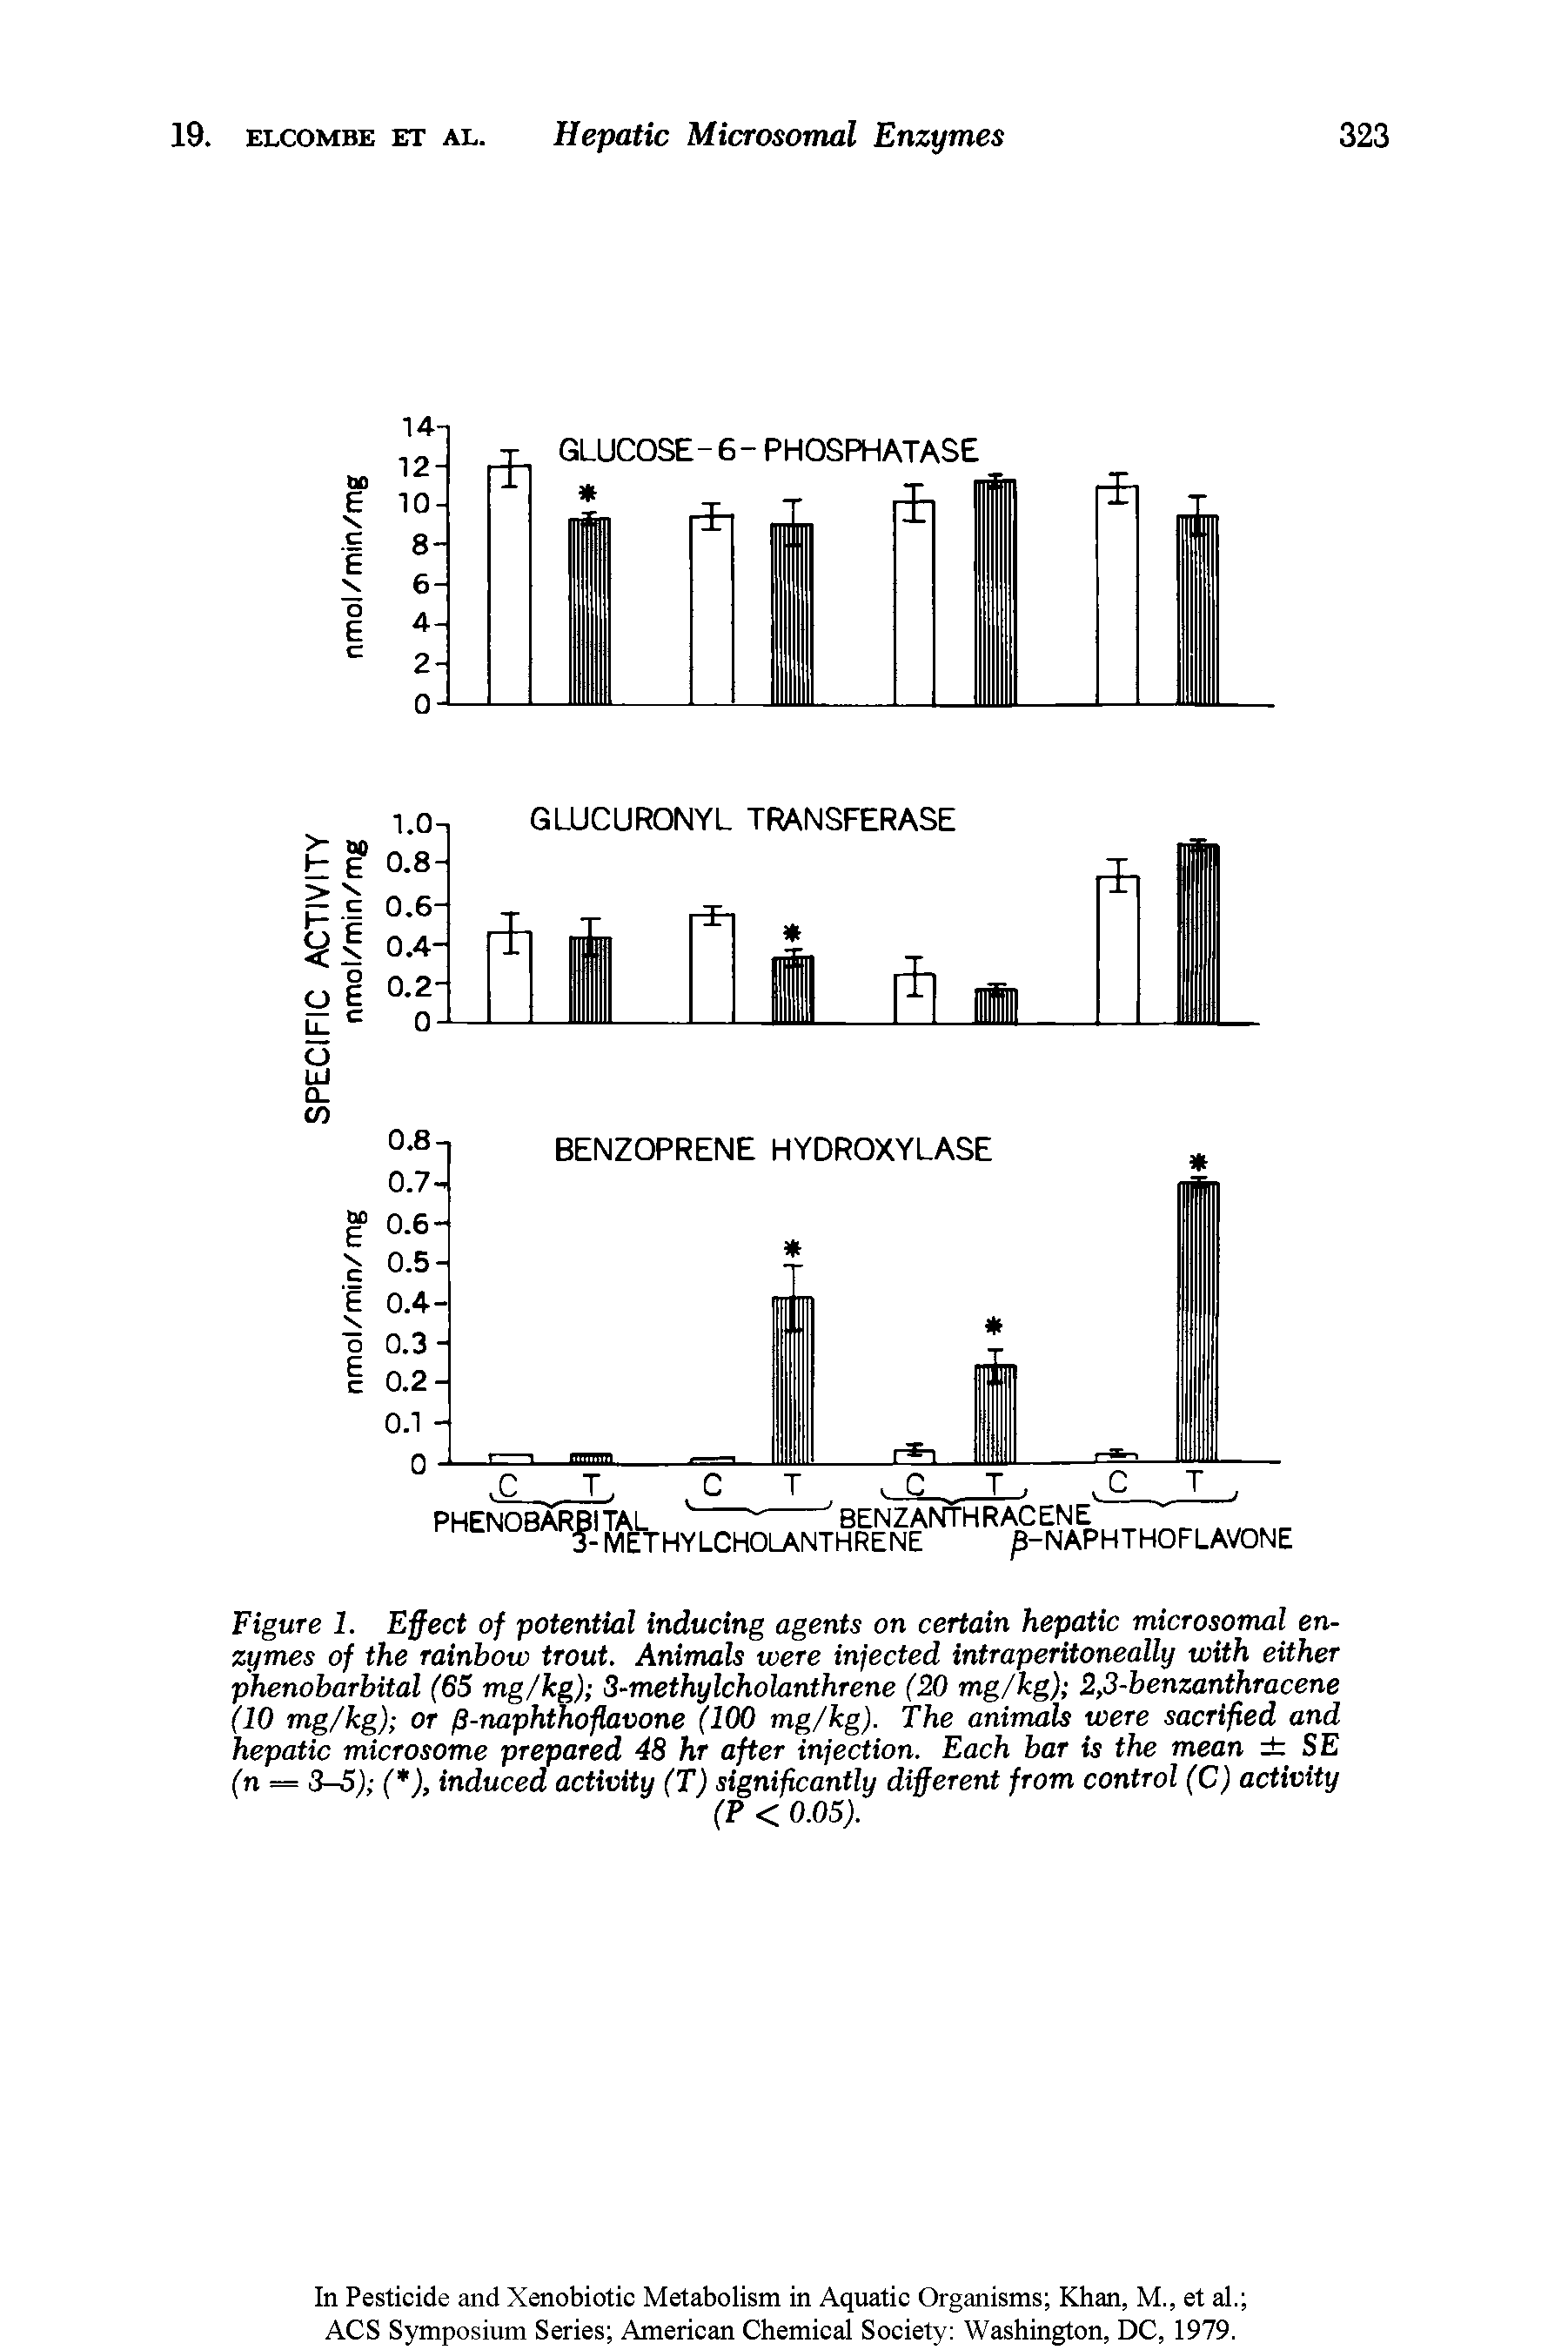 Figure 1. Effect of potential inducing agents on certain hepatic microsomal enzymes of the rainbow trout. Animals were infected intraperitoneally with either phenobarbital (65 mg/kg) 3-methylcholanthrene (20 mg/kg) 2,3-benzanthracene (10 mg/kg) or /3-naphthoflavone (100 mg/kg). The animals were sacrified and hepatic microsome prepared 48 hr after infection. Each bar is the mean SE (n = 3-5) ( ), induced activity (T) significantly different from control (C) activity...